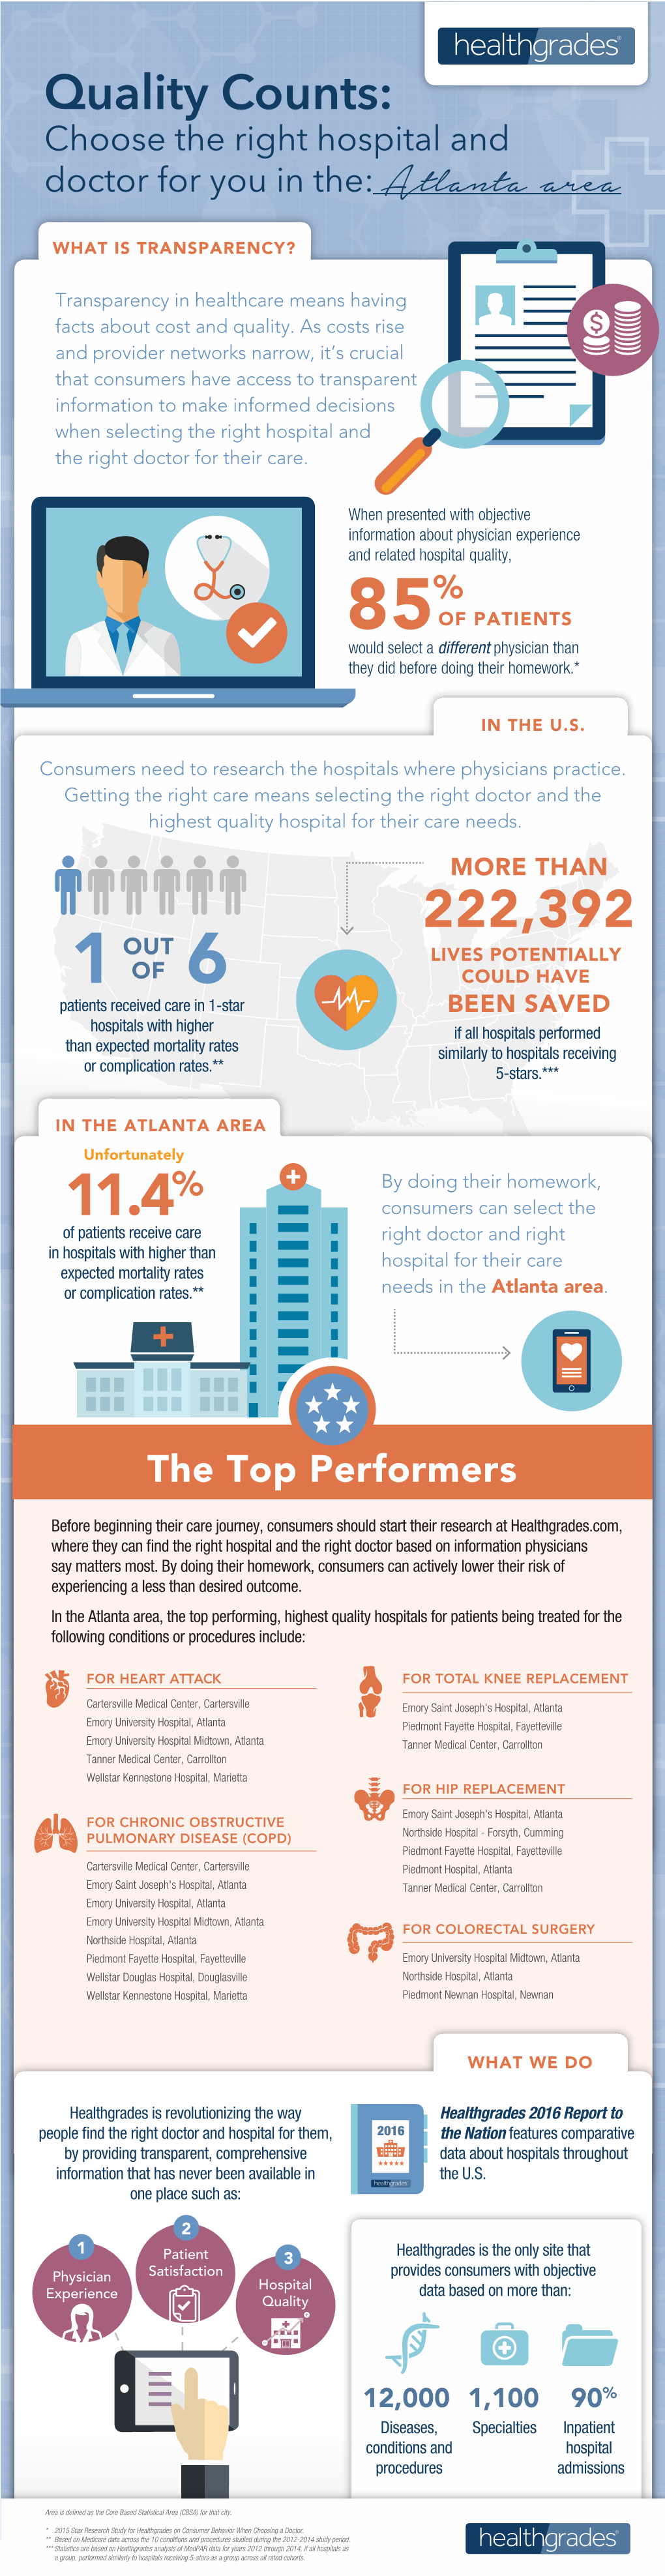 Quality Counts: Choose the Right Hospital and Doctor for You in The: Atlanta Area